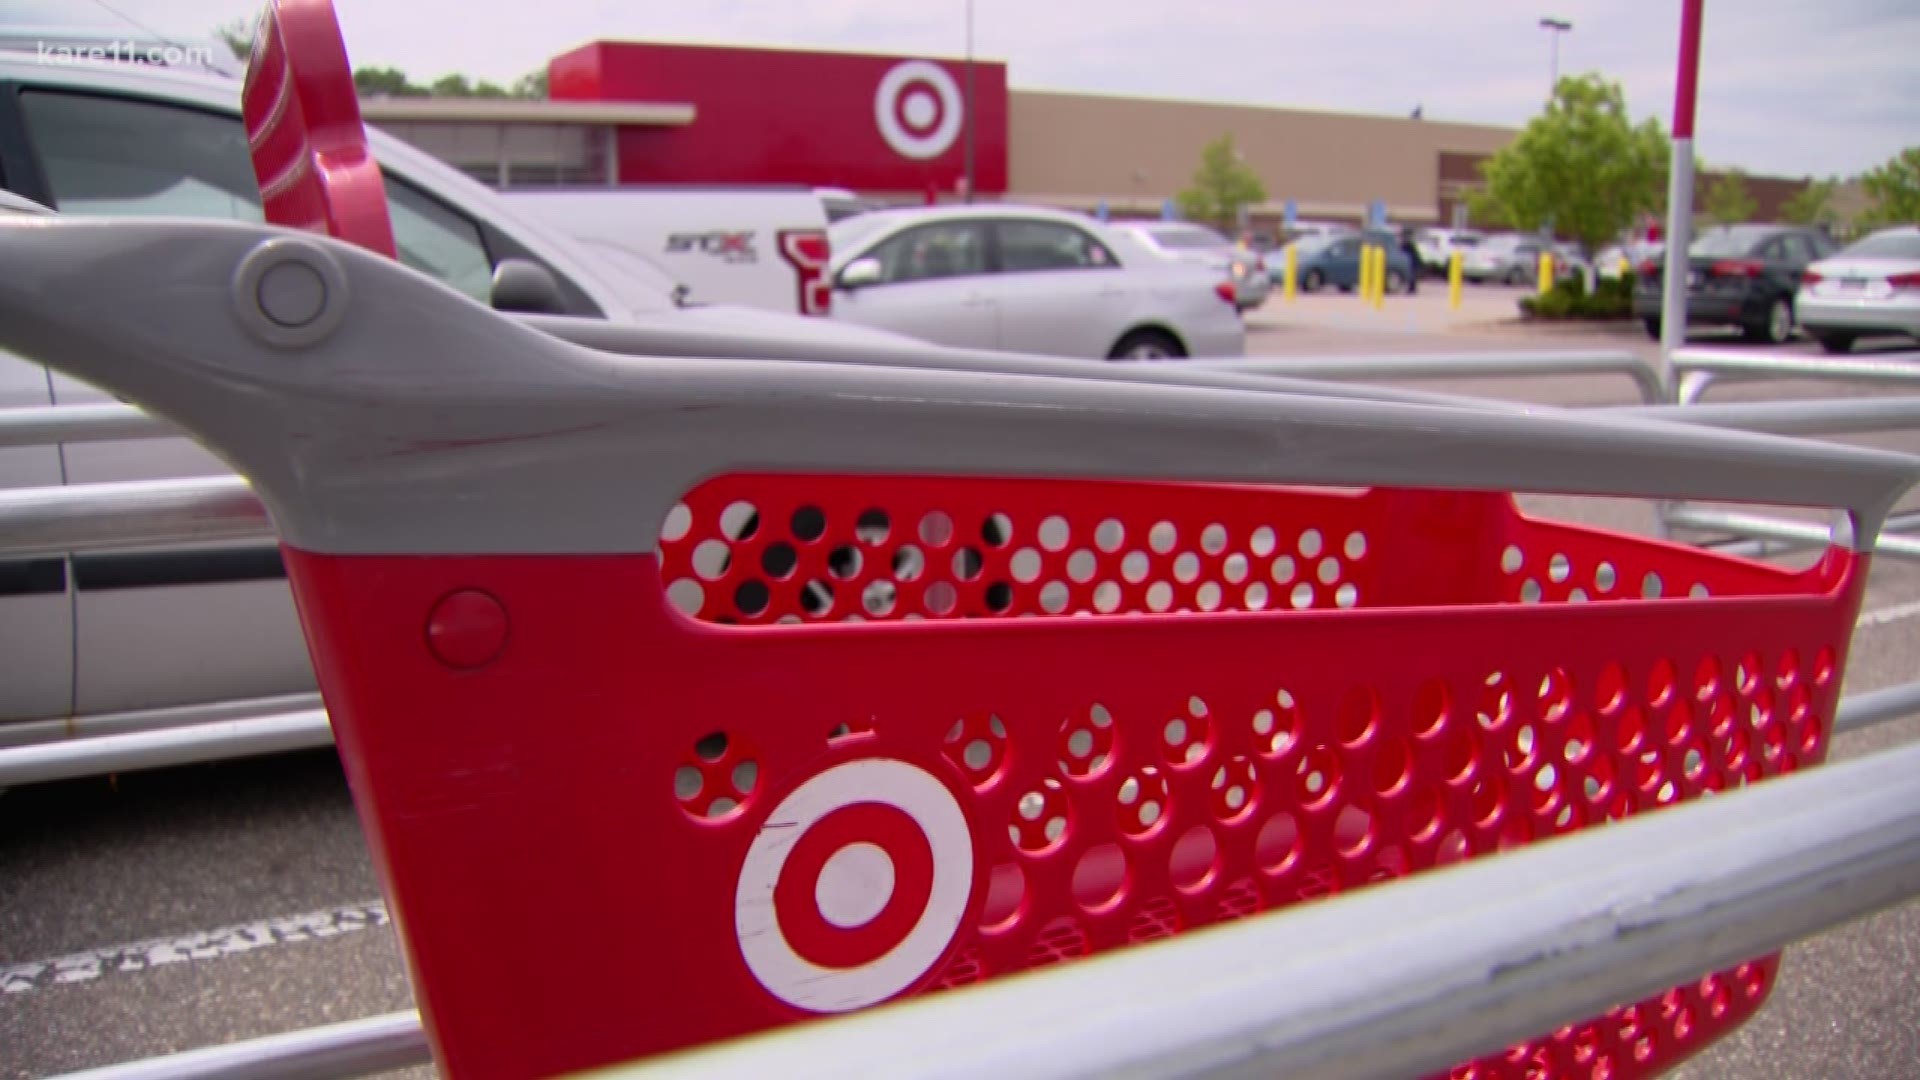 Target Corporate announced shortly after 4:00 p.m. that their cash registers were fully back online at all stores.